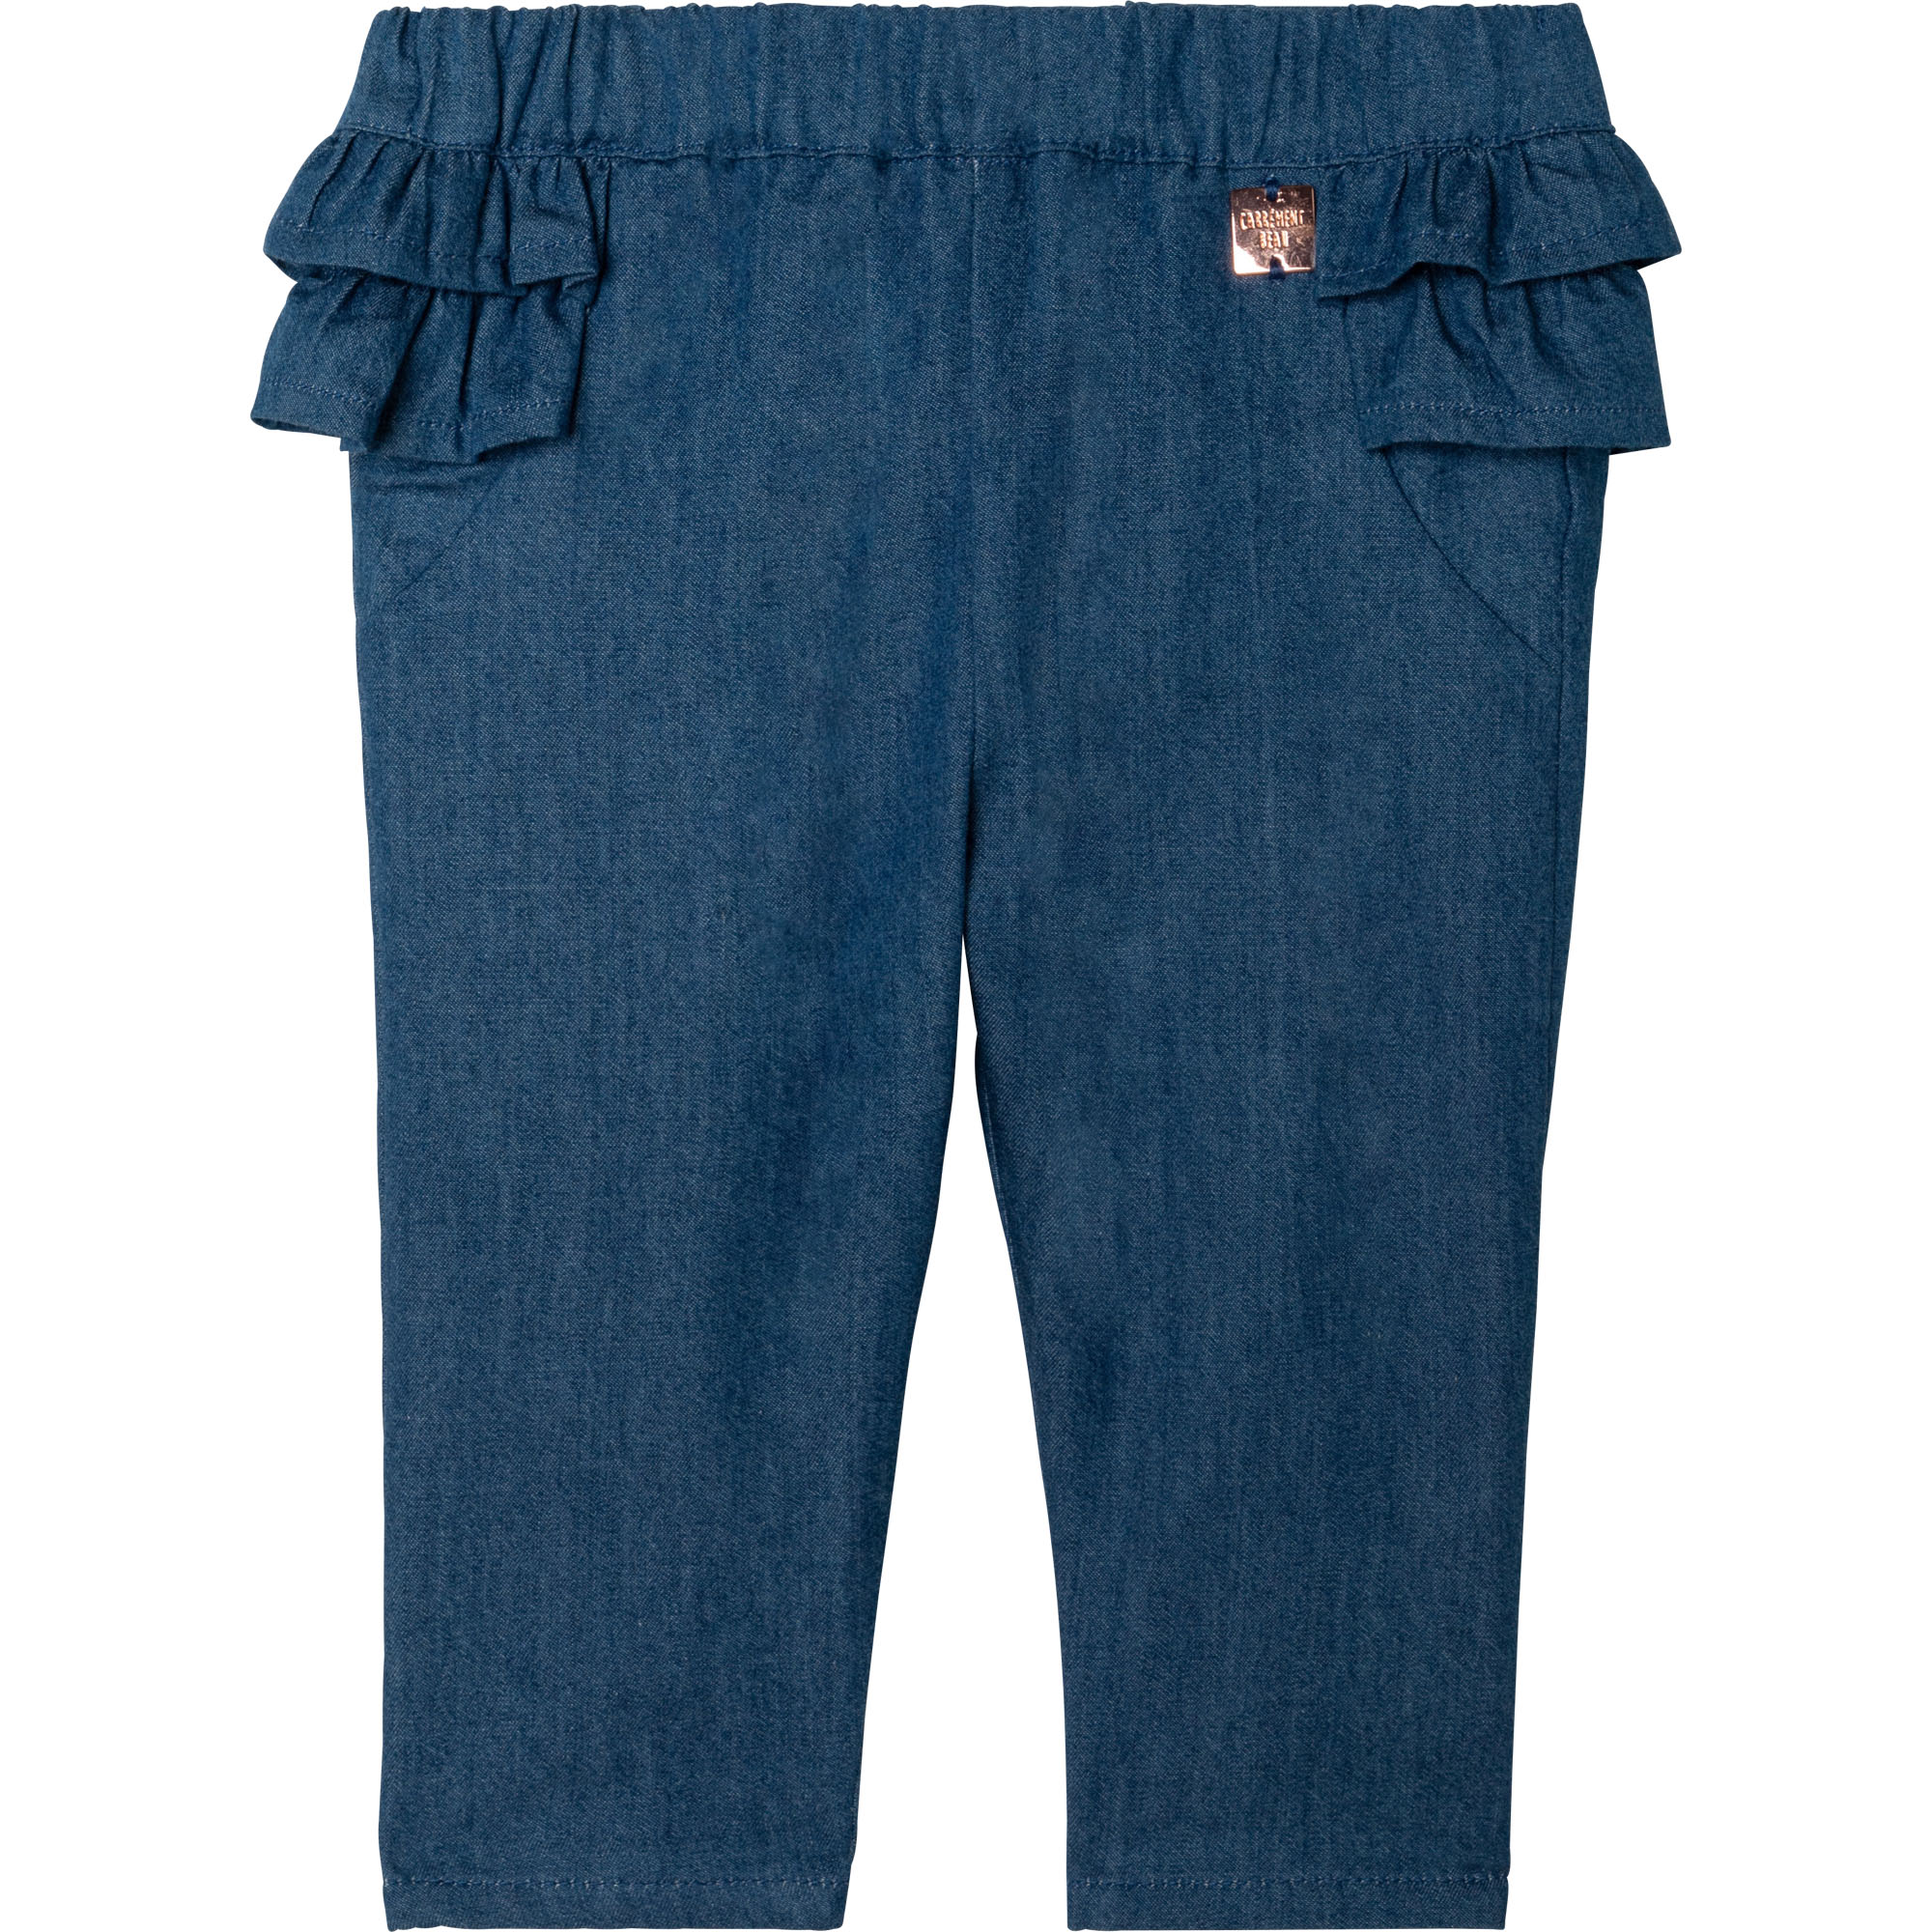 Straight-cut ruffled jeans CARREMENT BEAU for GIRL